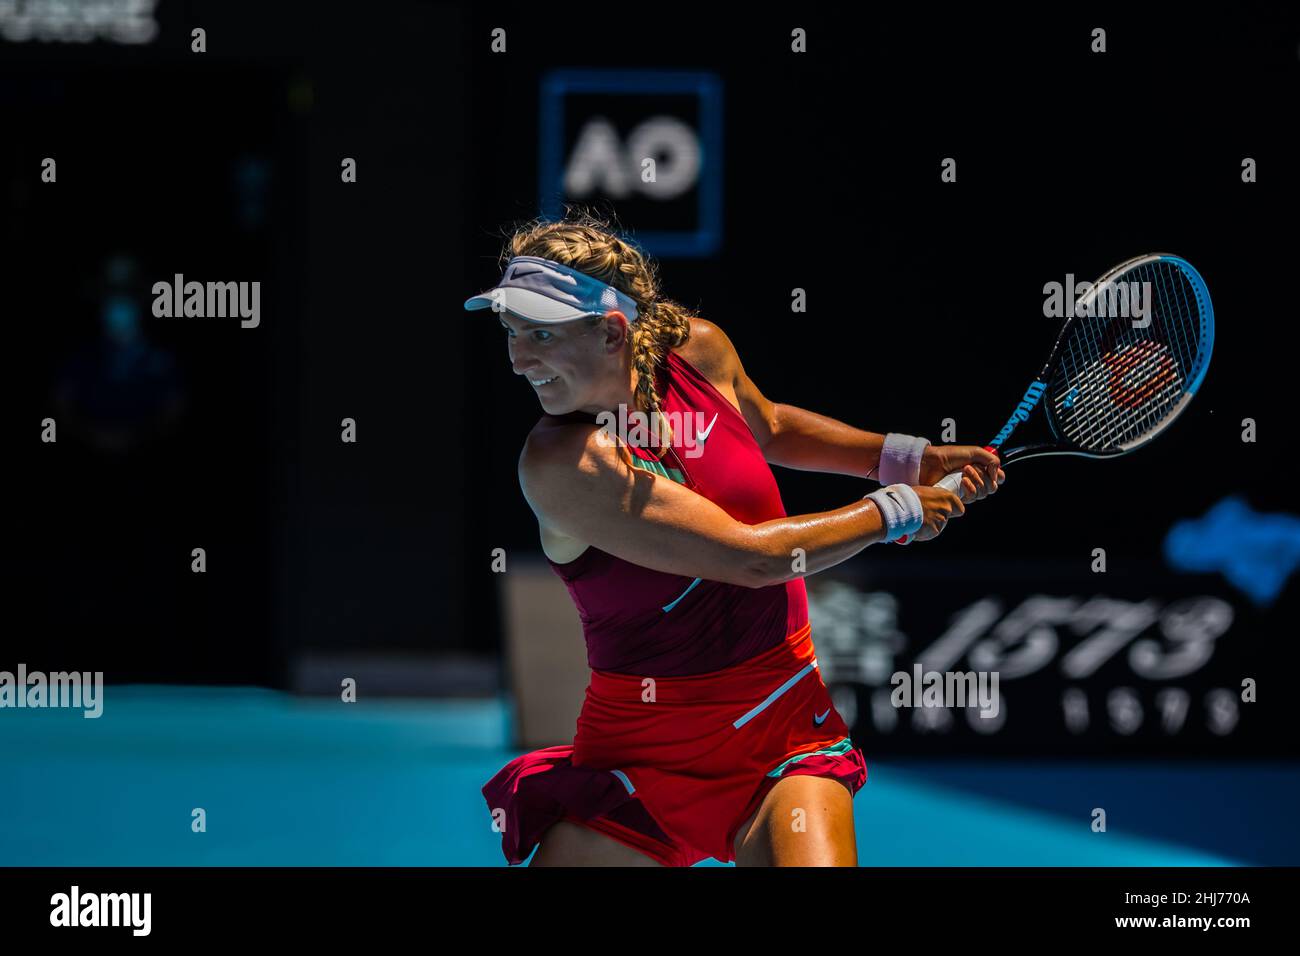 Victoria Azarenka of Belarus in action during the Australian Open 2022  Round 3 match of the Grand Slam against Barbora Krejcikova of Czech  Republic at Rod Laver Arena in Melbourne Olympic Park.Final